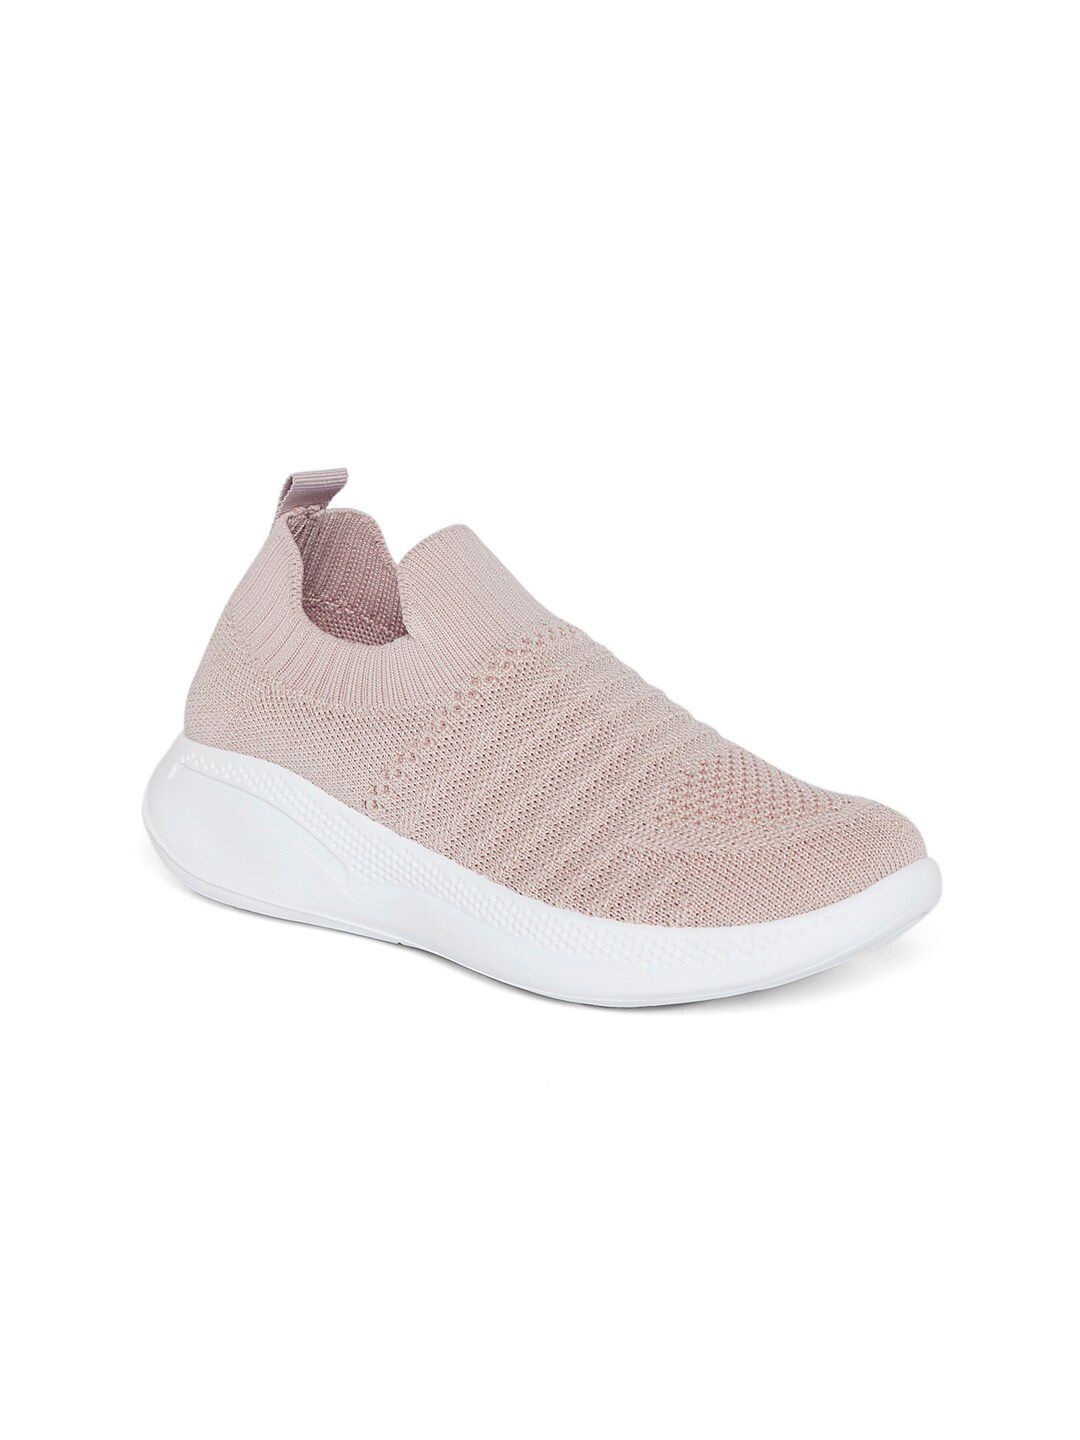 Forever Glam by Pantaloons Women Pink Woven Design PU Slip-On Sneakers Price in India